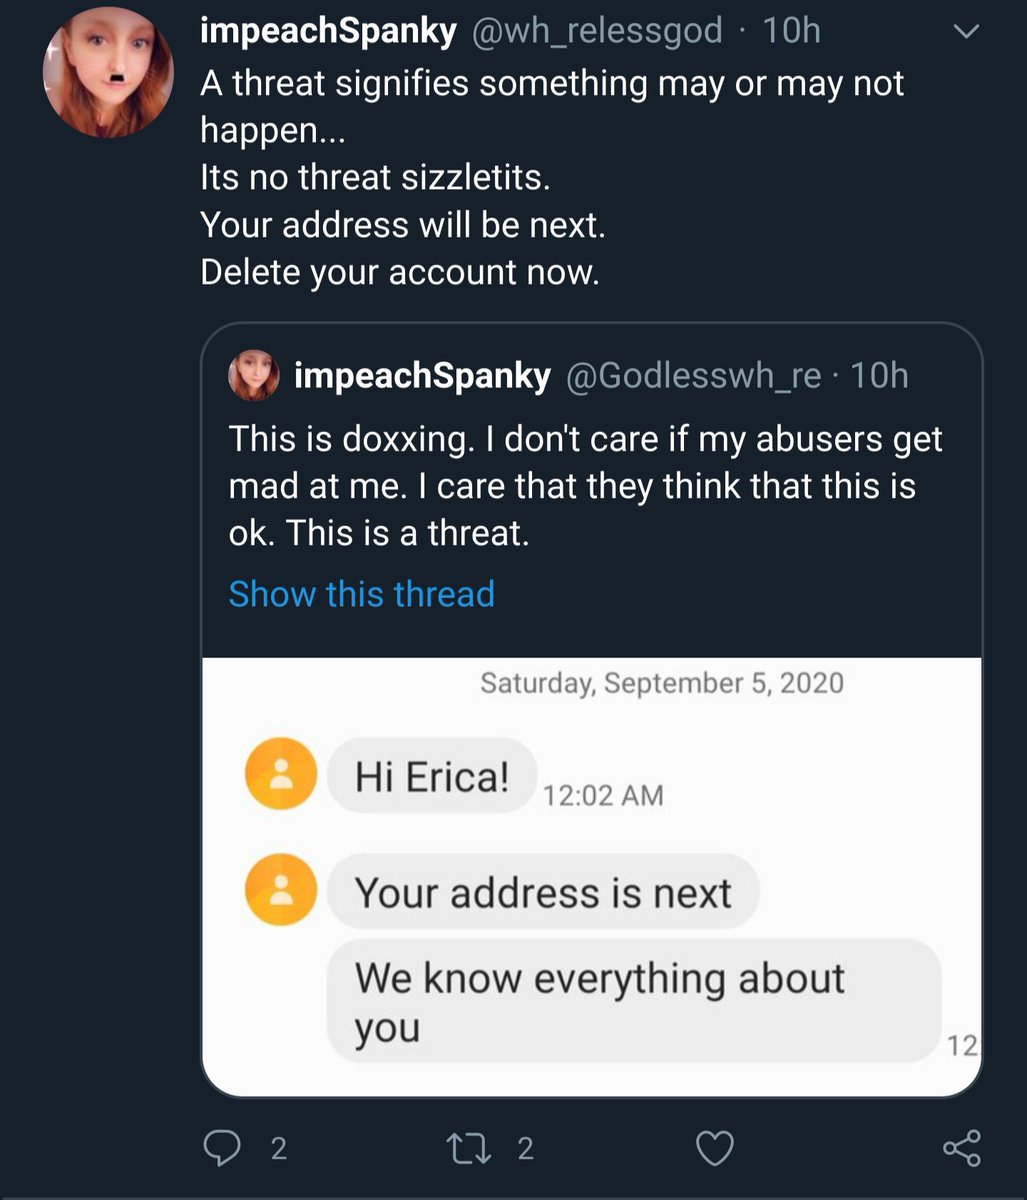 Yet another instance of threatening to release her home address and from the phrasing it appears Reless is the person behind the threatening messages sent to her phone: https://twitter.com/wh_relessgod/status/1302229158400061445?s=19 https://archive.is/d9phO 